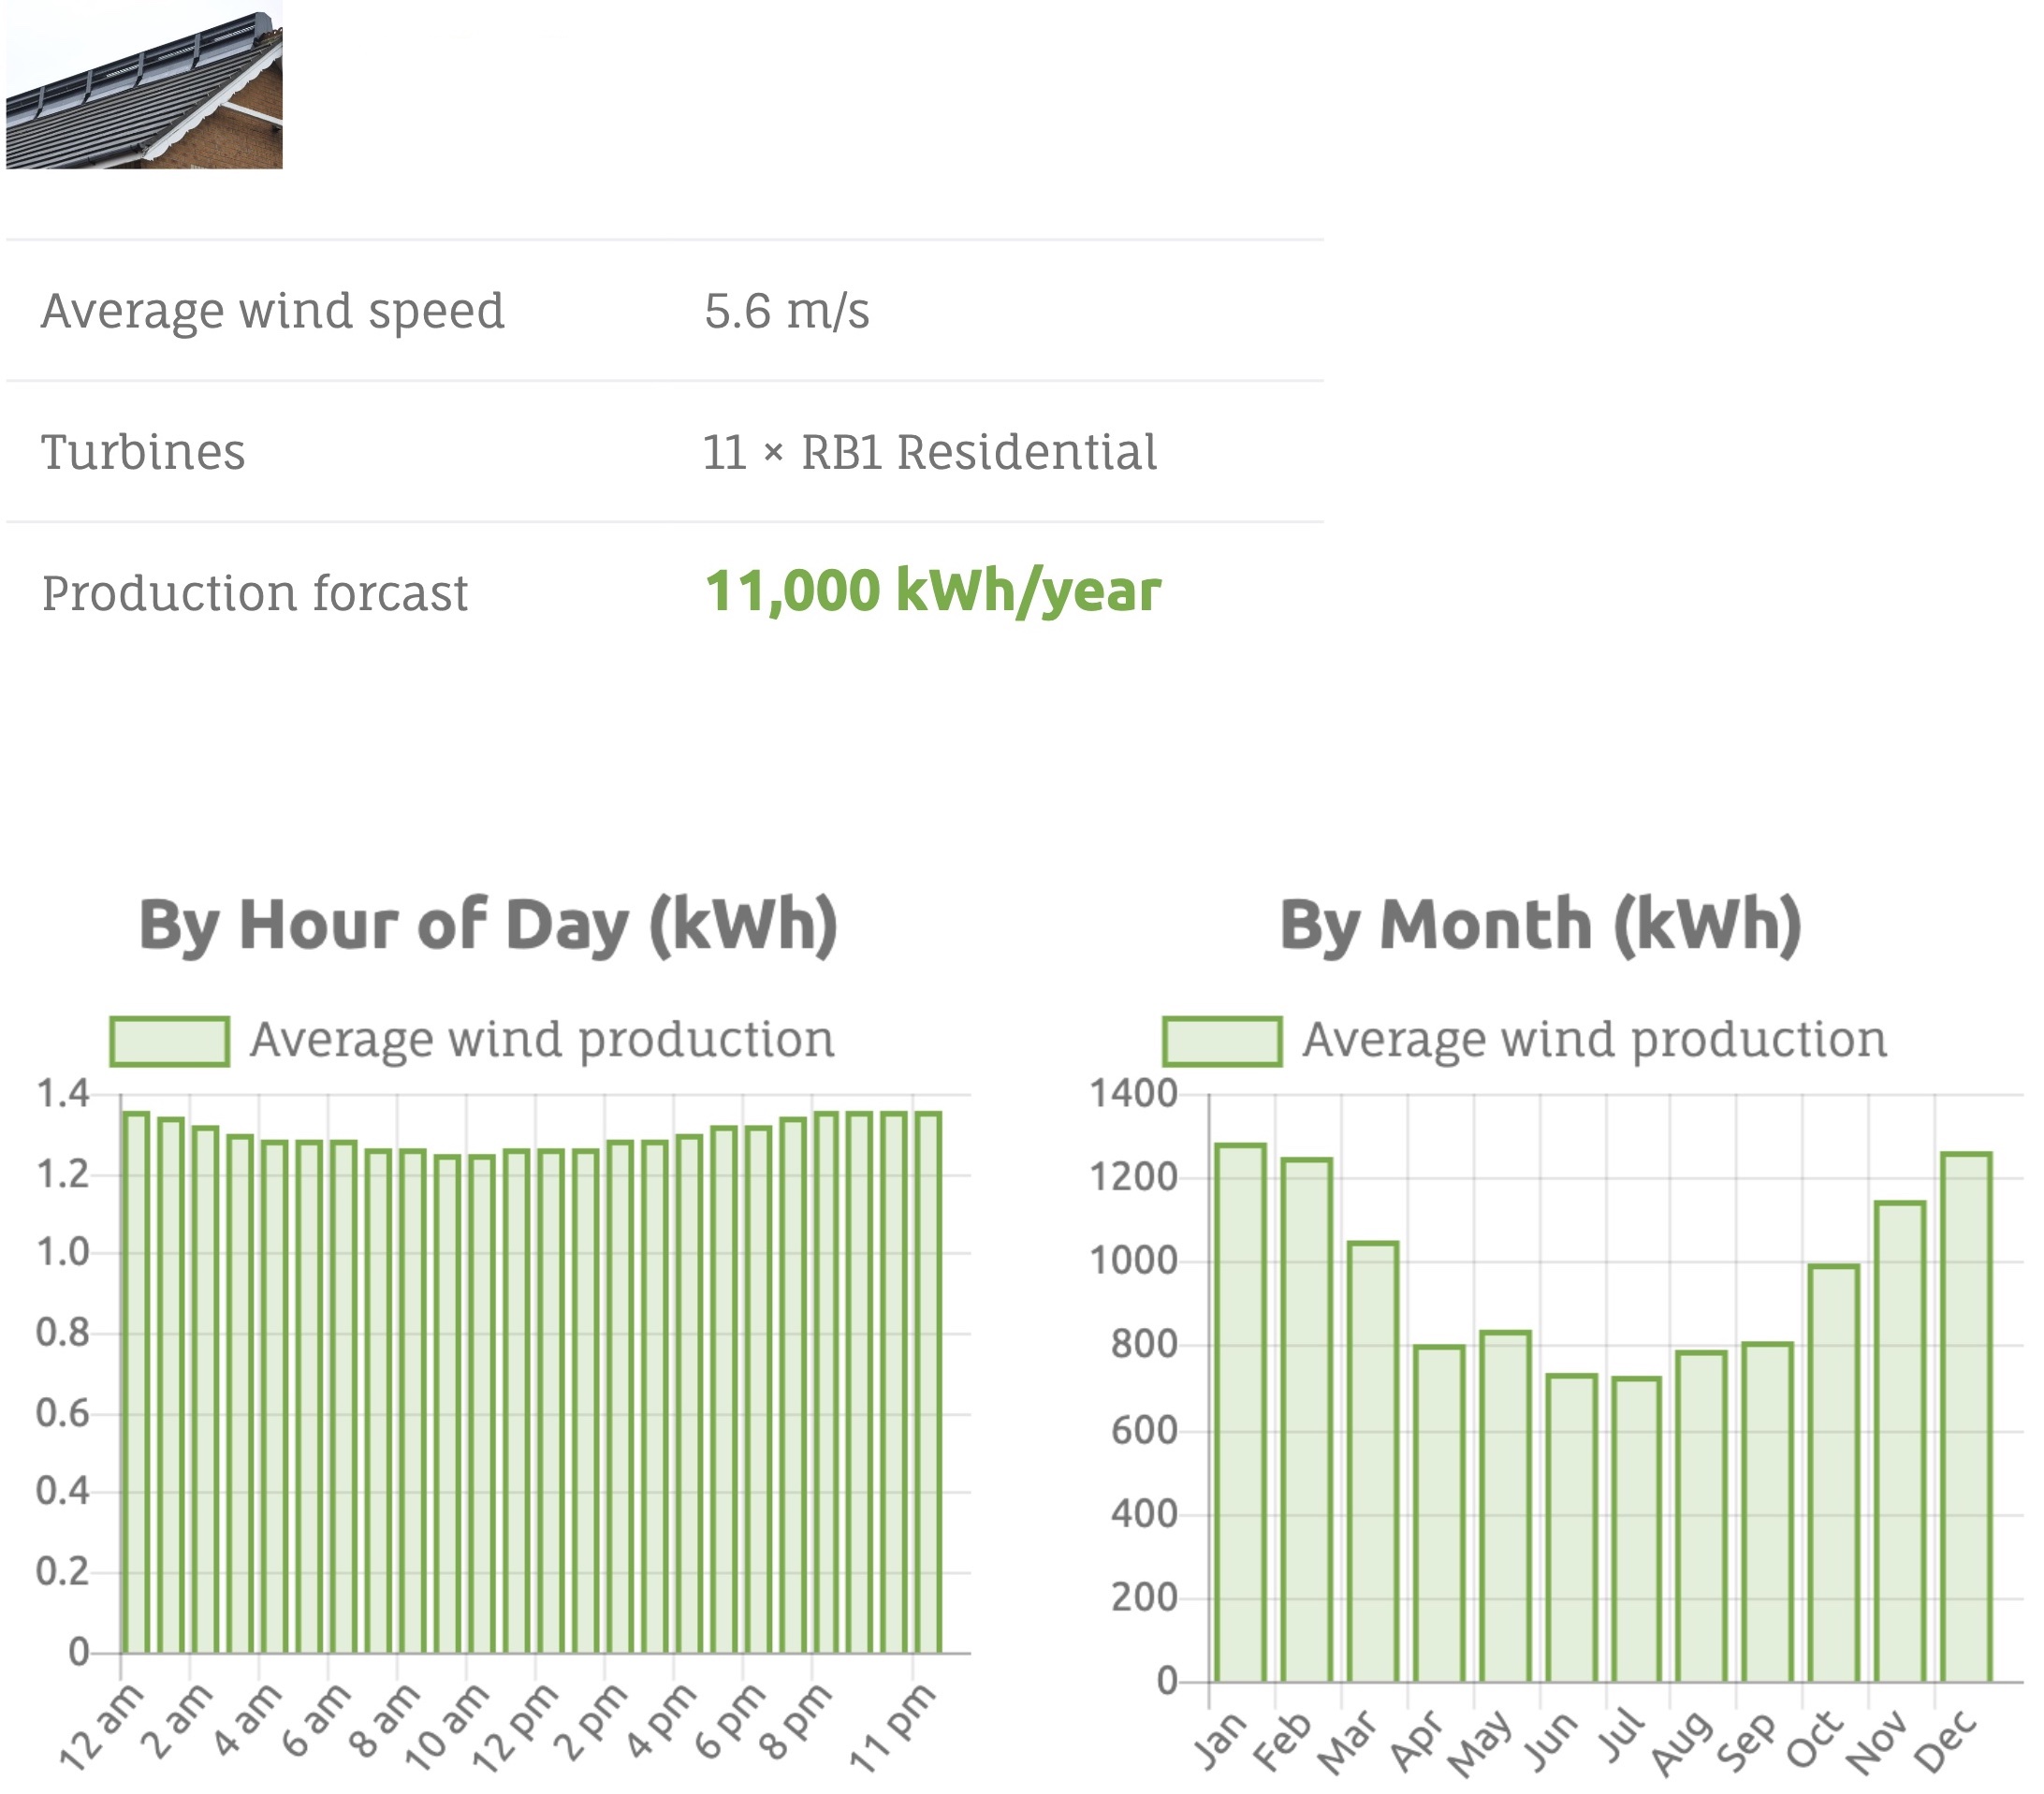 Proprietary site assessment tool
Exclusively for accredited partners and installers
System aggregates all available data for a potential installation site
Generates a detailed wind and solar hybrid report